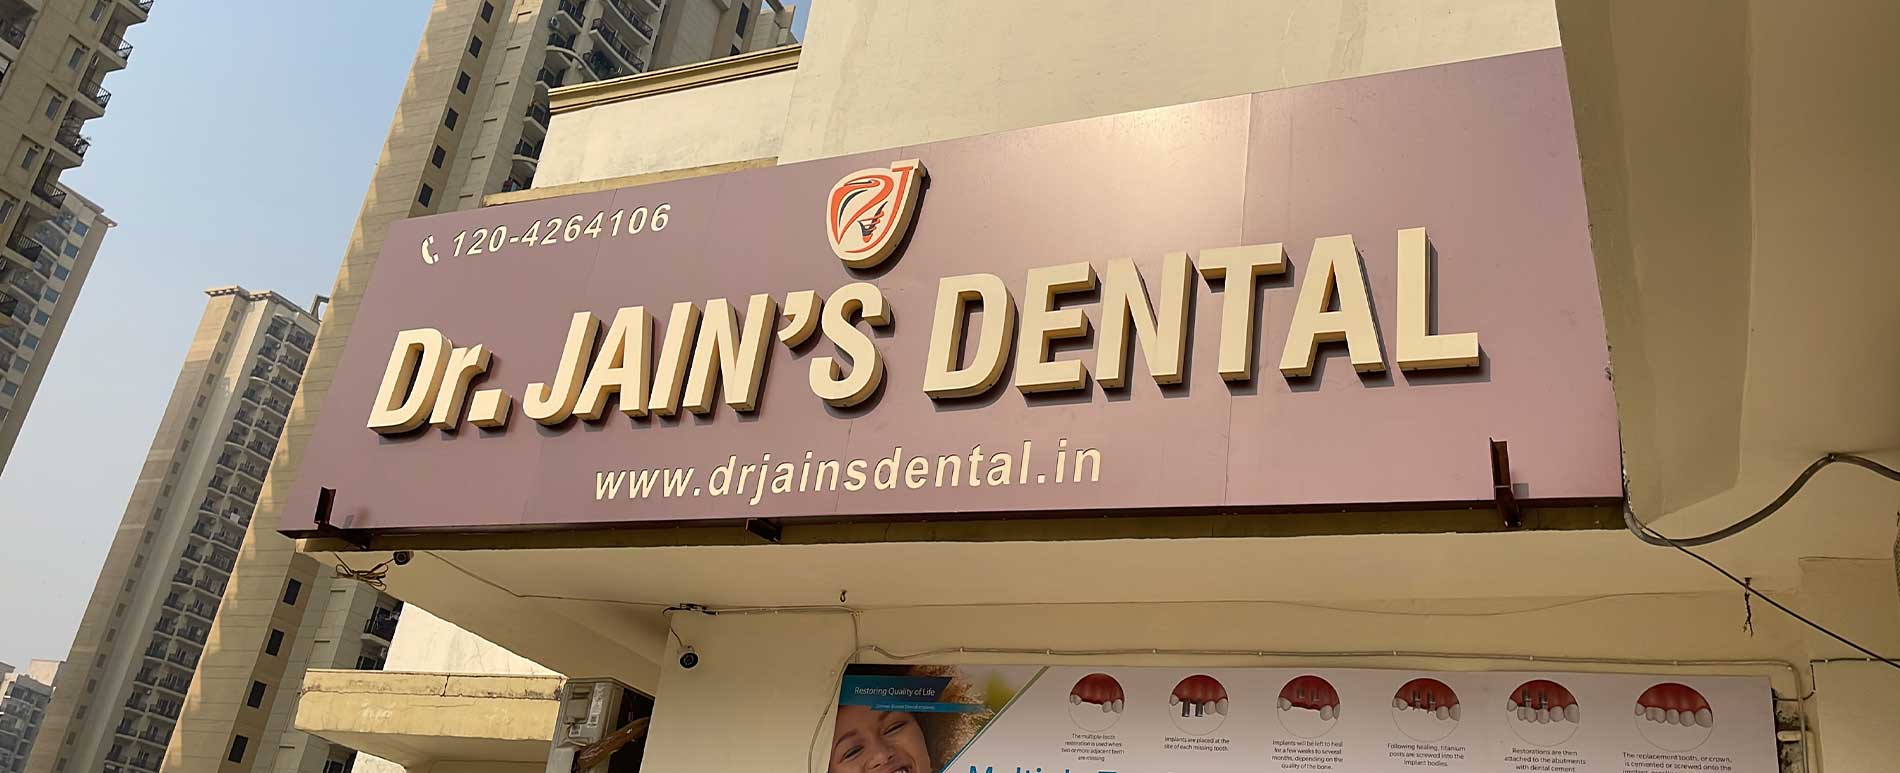 Dr. Jains Dental and Implant Clinic